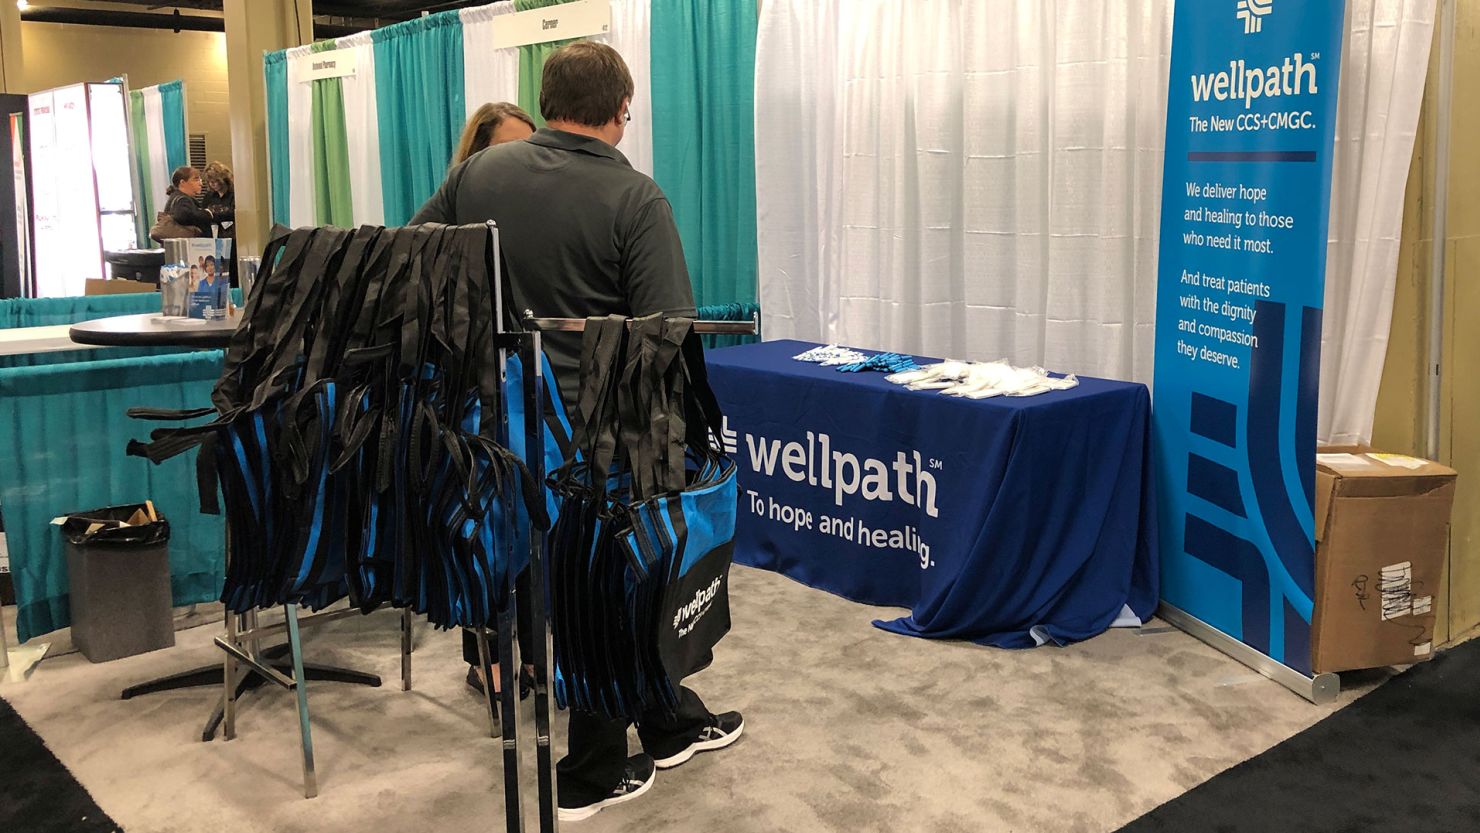 A Wellpath display is pictured at a conference organized by the National Commission on Correctional Health Care in Nashville, Tennessee, U.S., April 9, 2019.